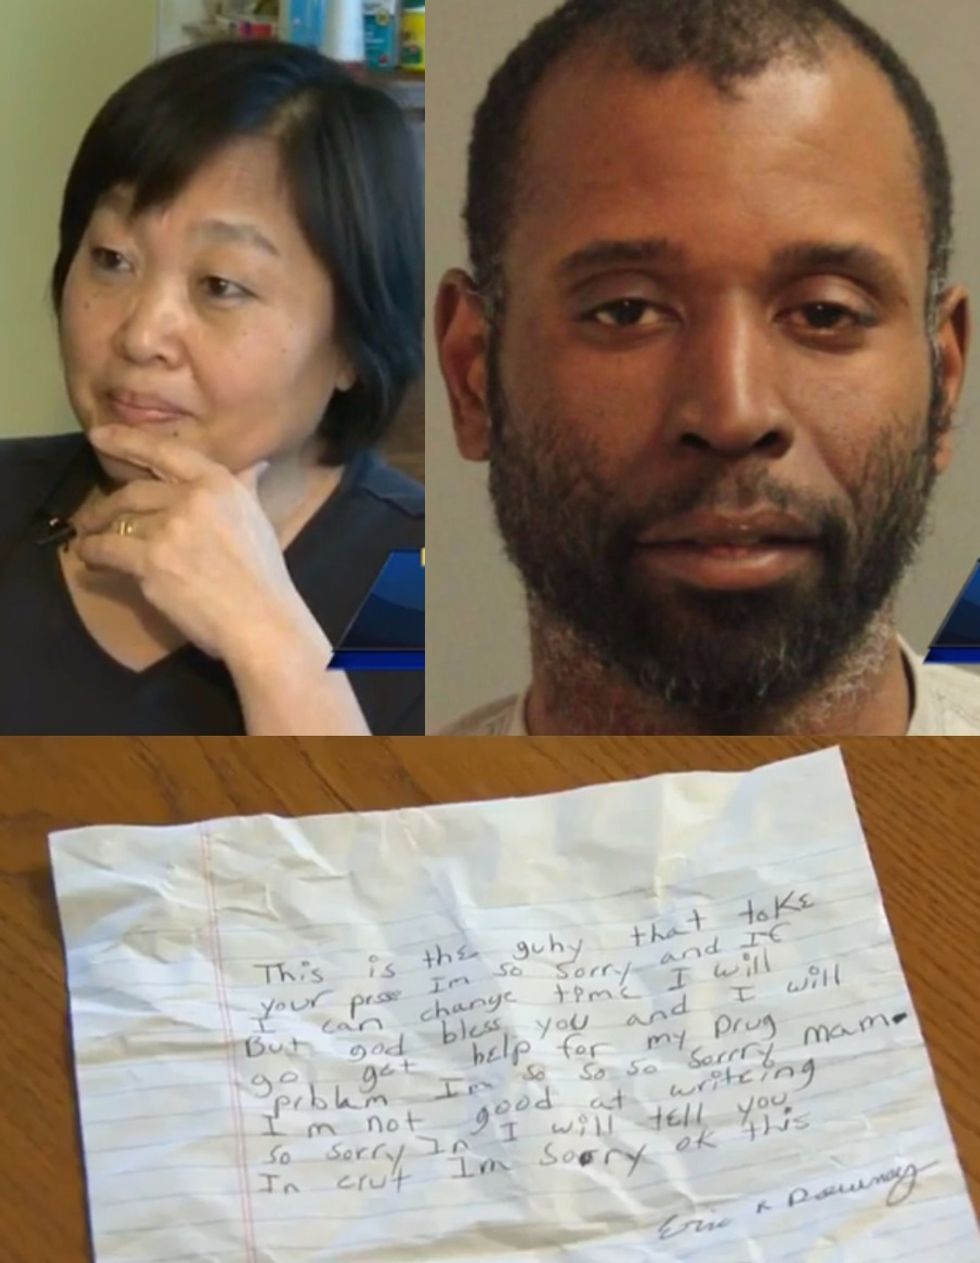 He Robbed Her, She Bit His Hand. Then Police Showed Up With the Letter He Wrote to Her.